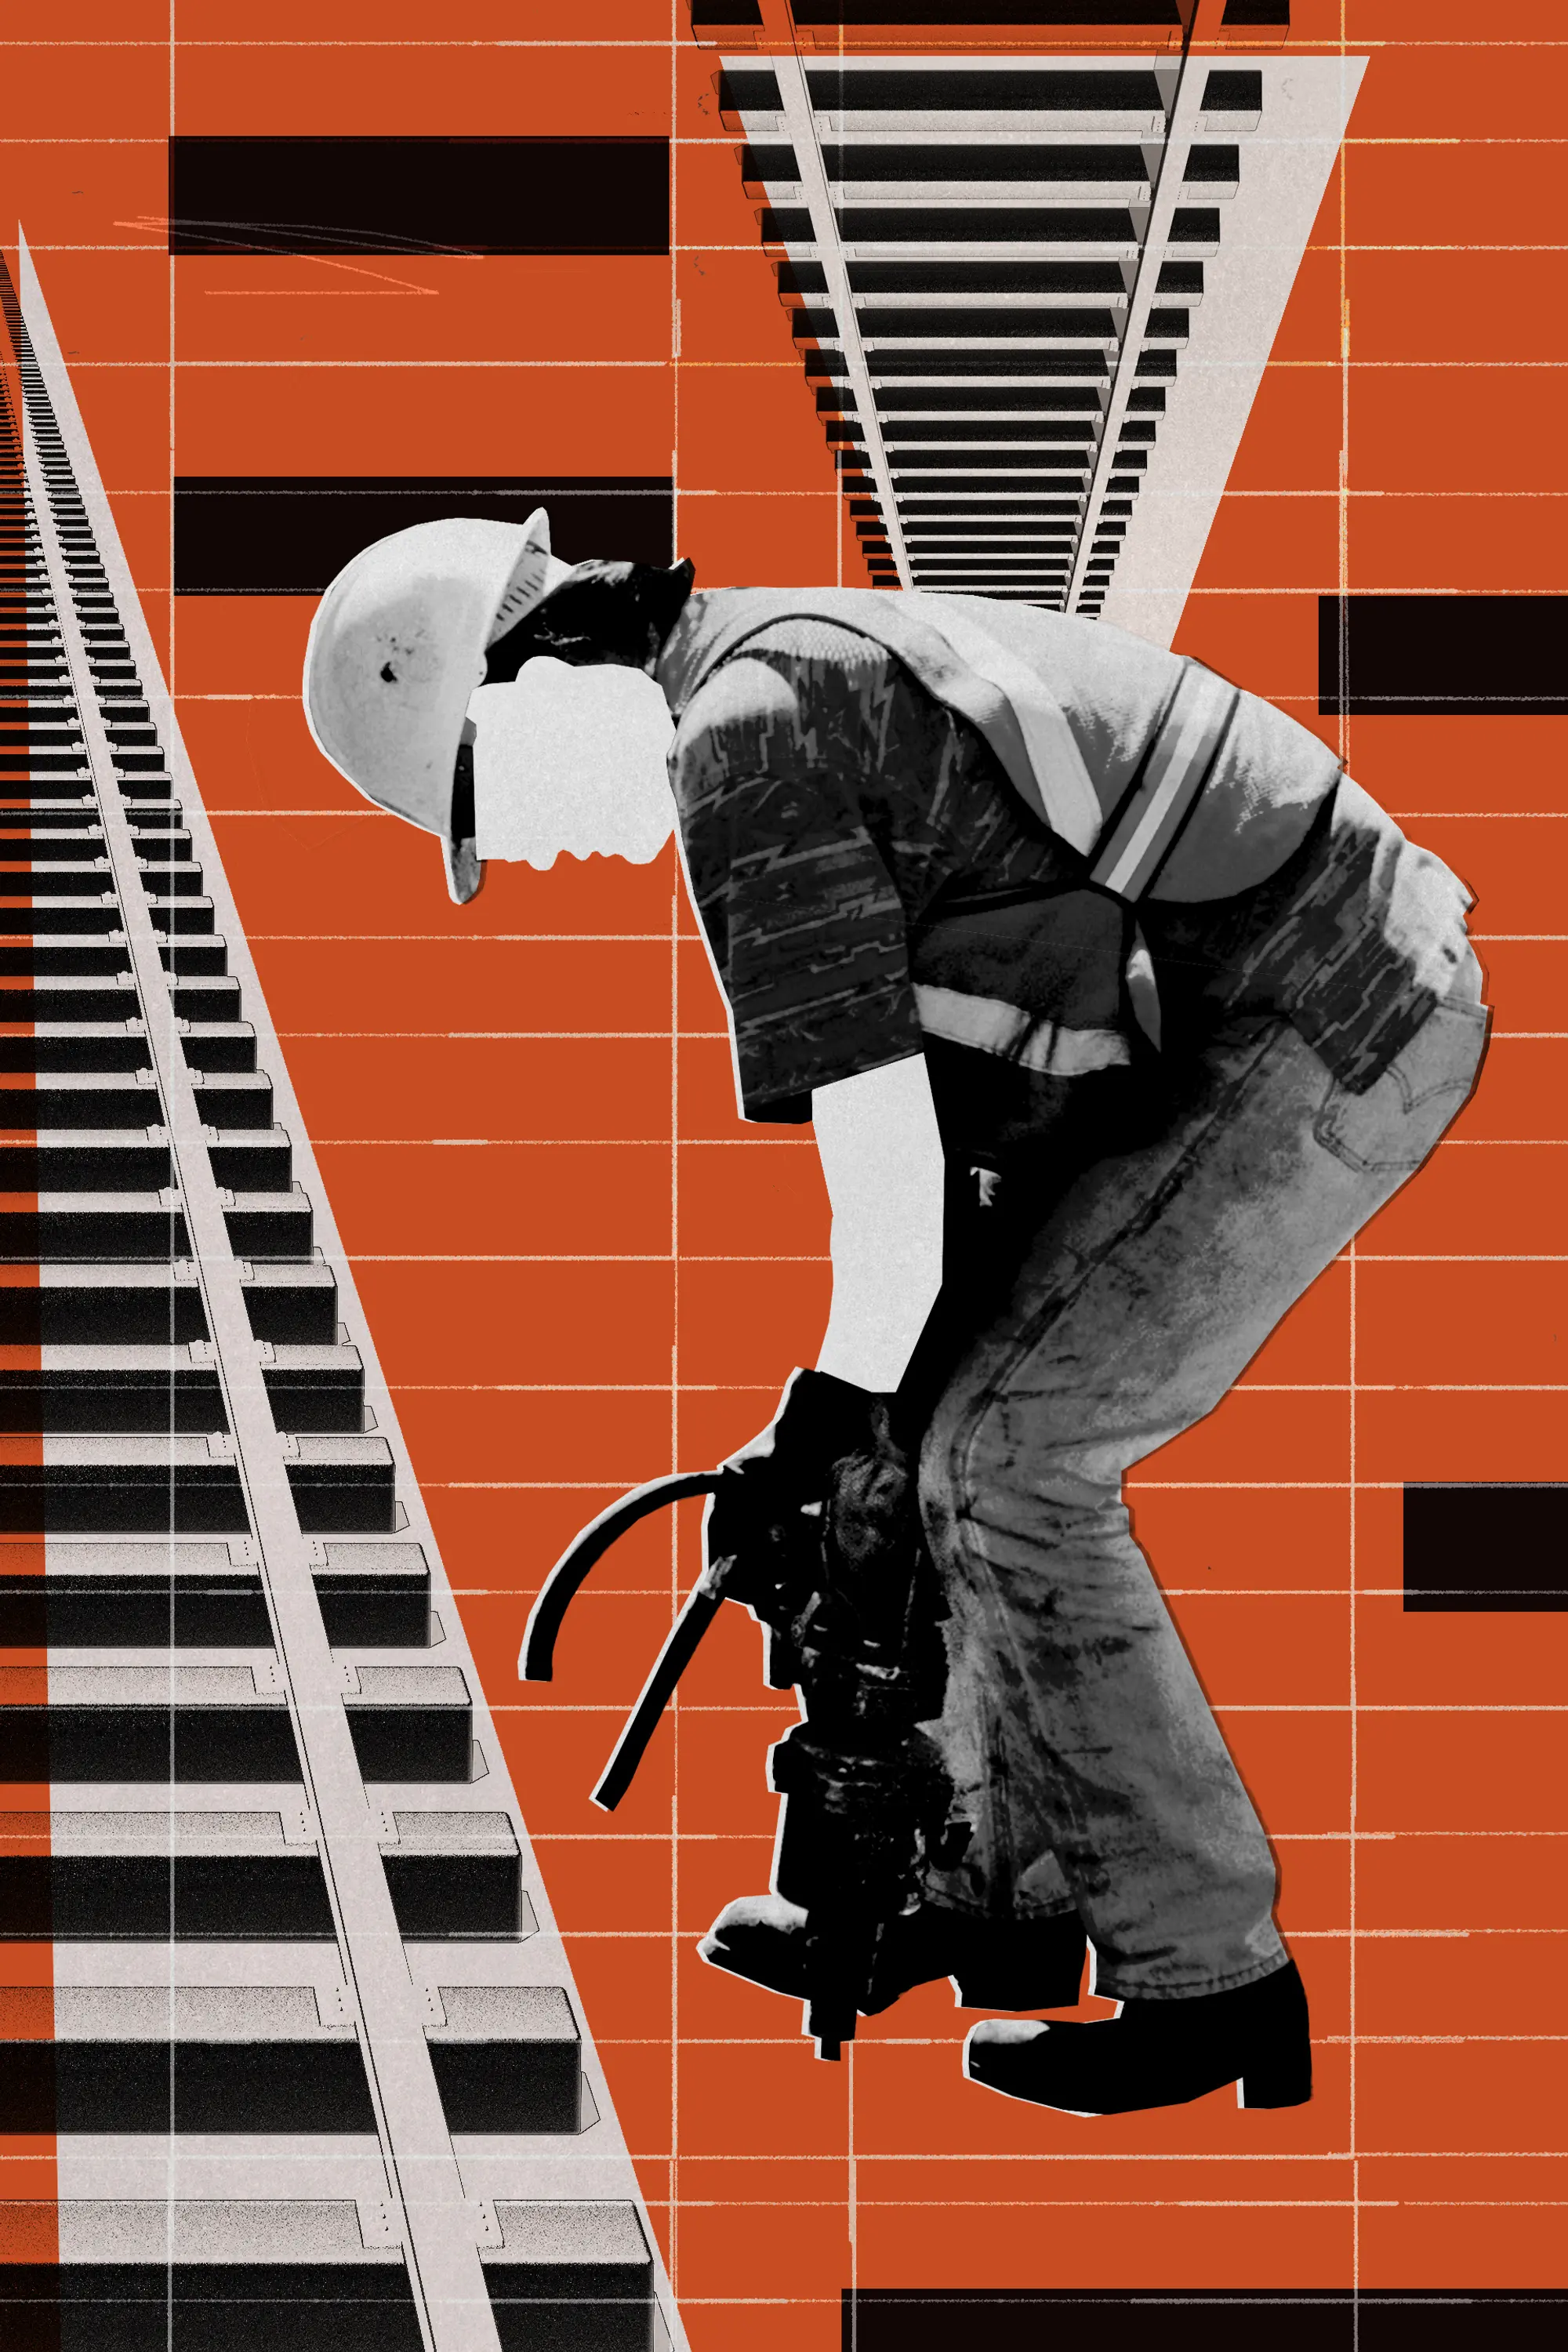 What’s Missing From Railroad Safety Data? Dead Workers and Severed Limbs. (propublica.org)